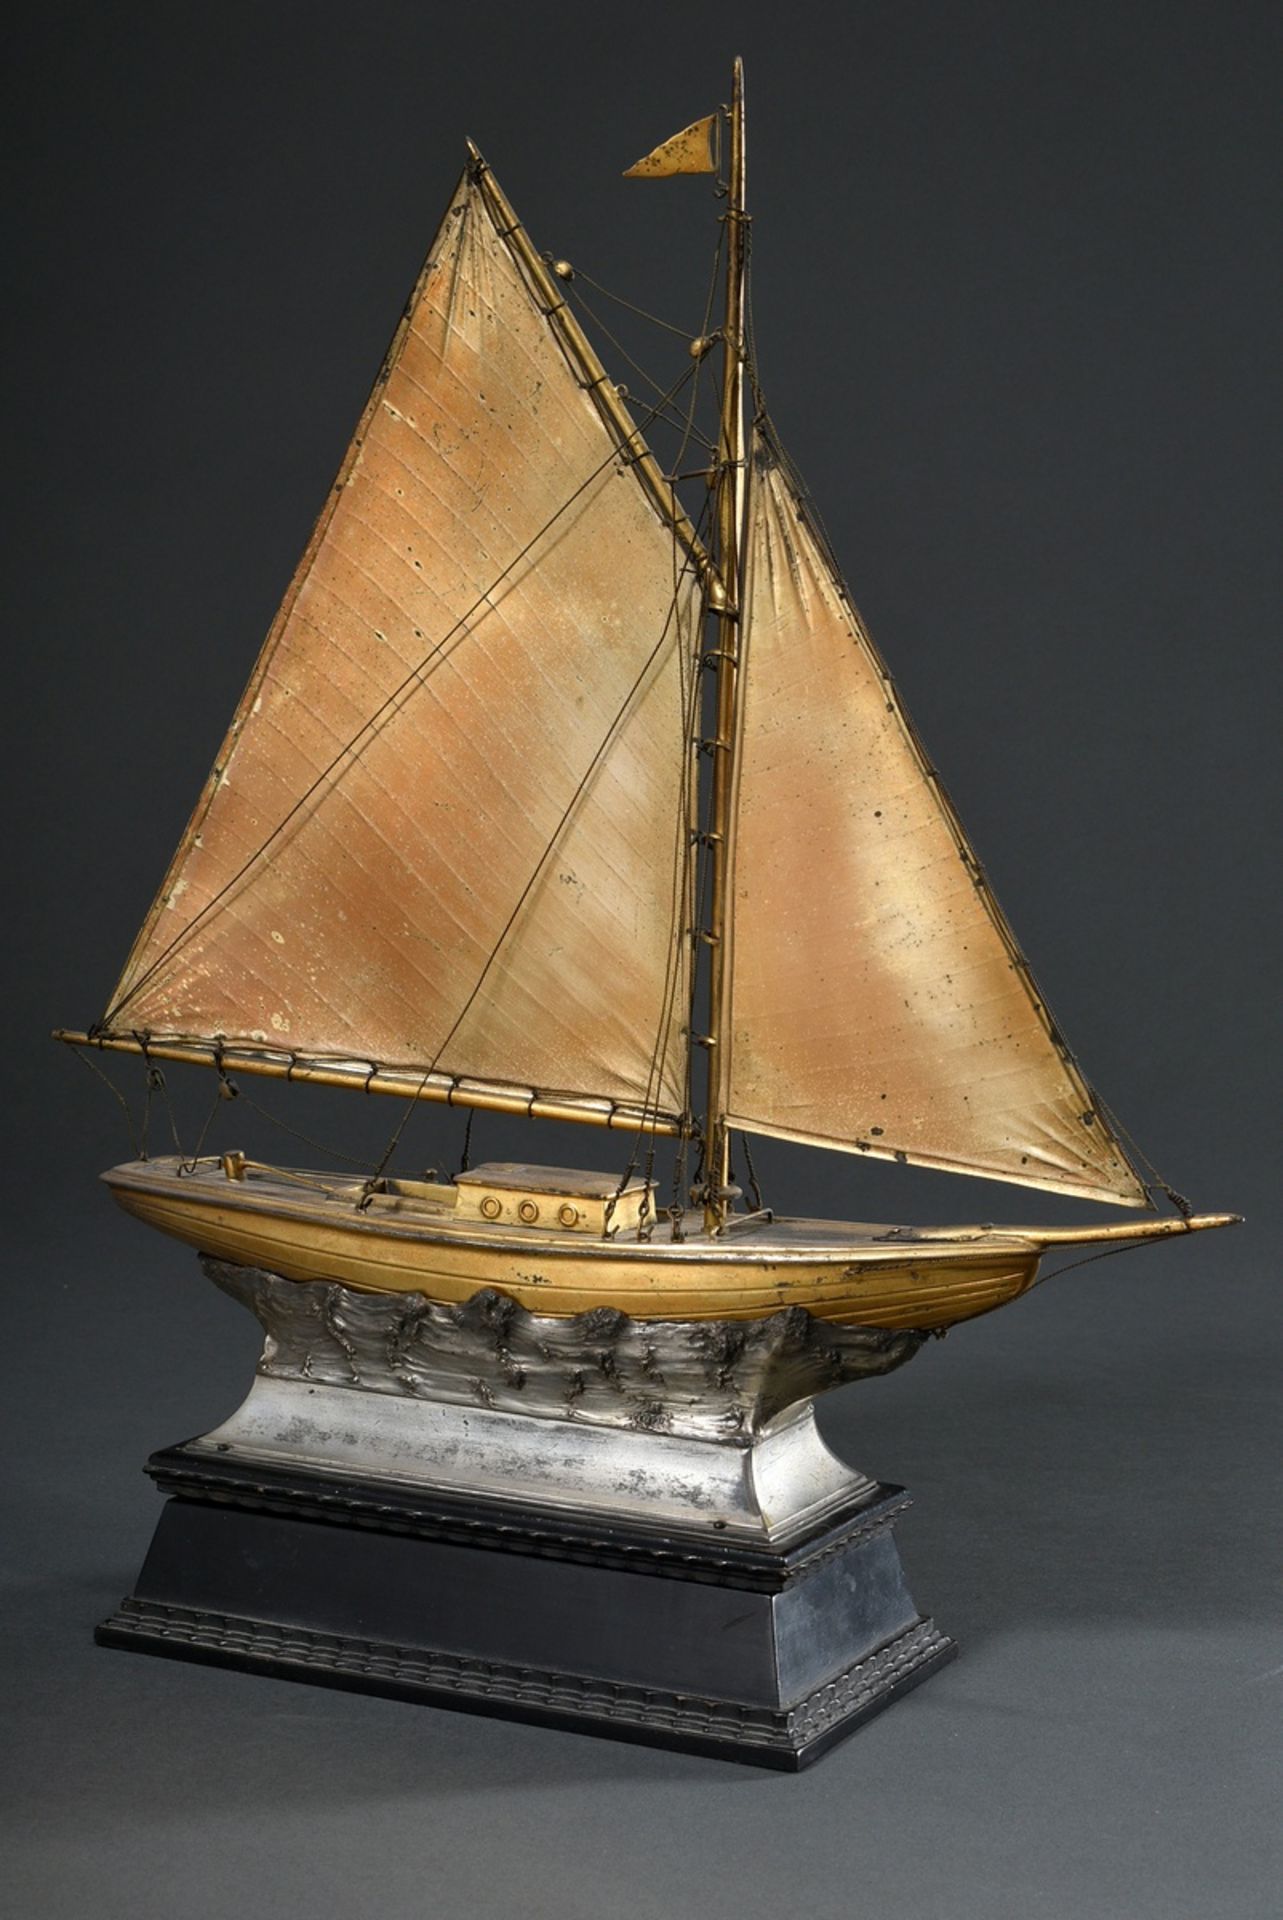 Model ship sailing price "Yacht", wood/metal, galvanised, on metal stand with sculptural waves and 